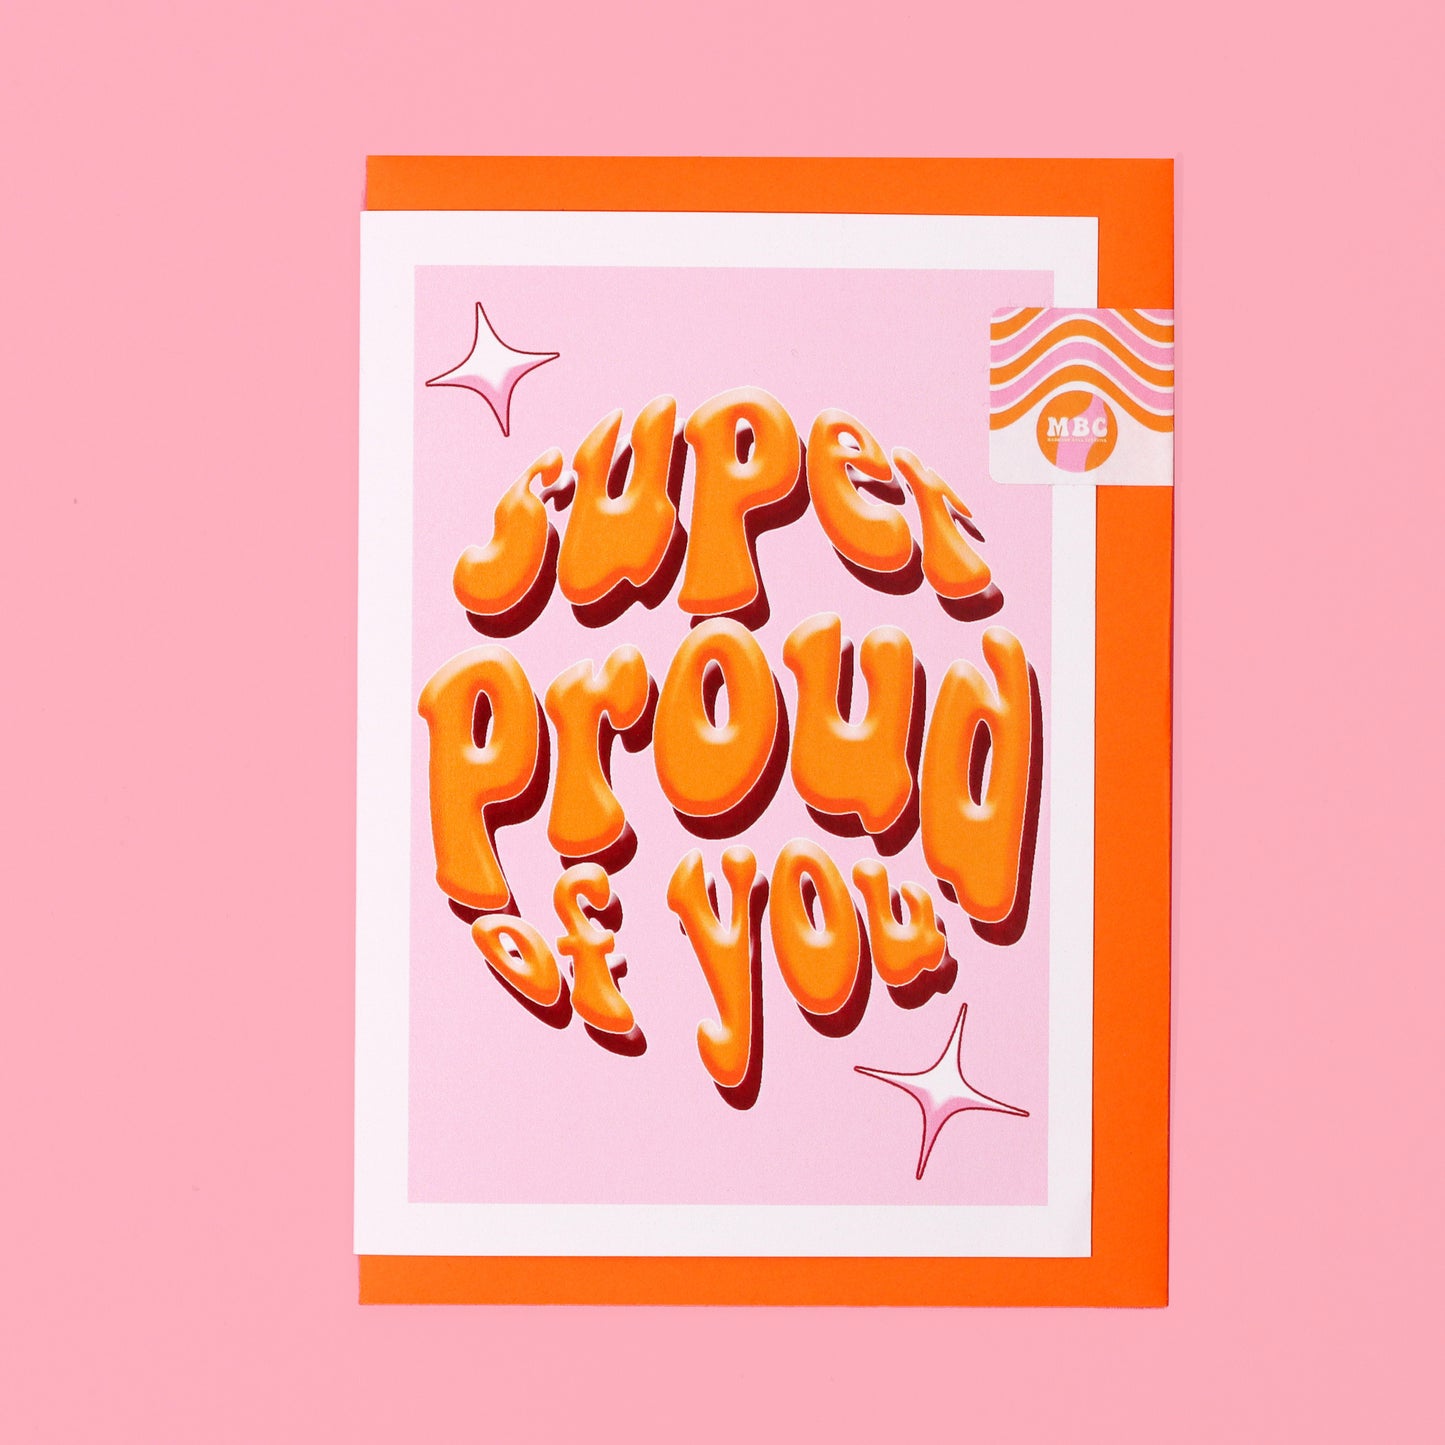 A6 Super Proud of You Card